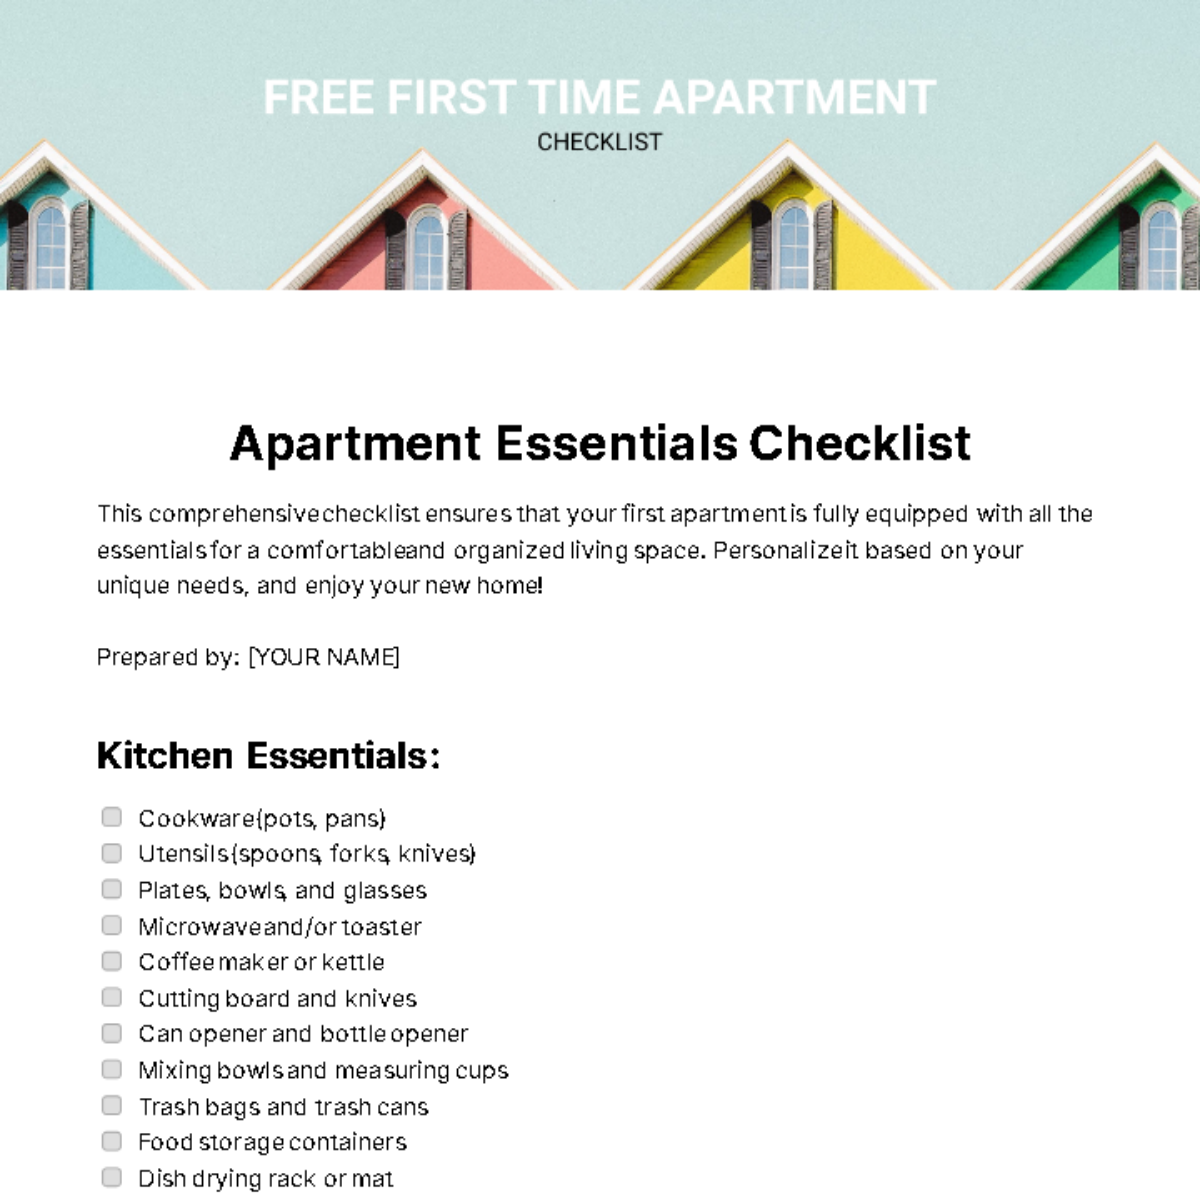 First Time Apartment Checklist Template